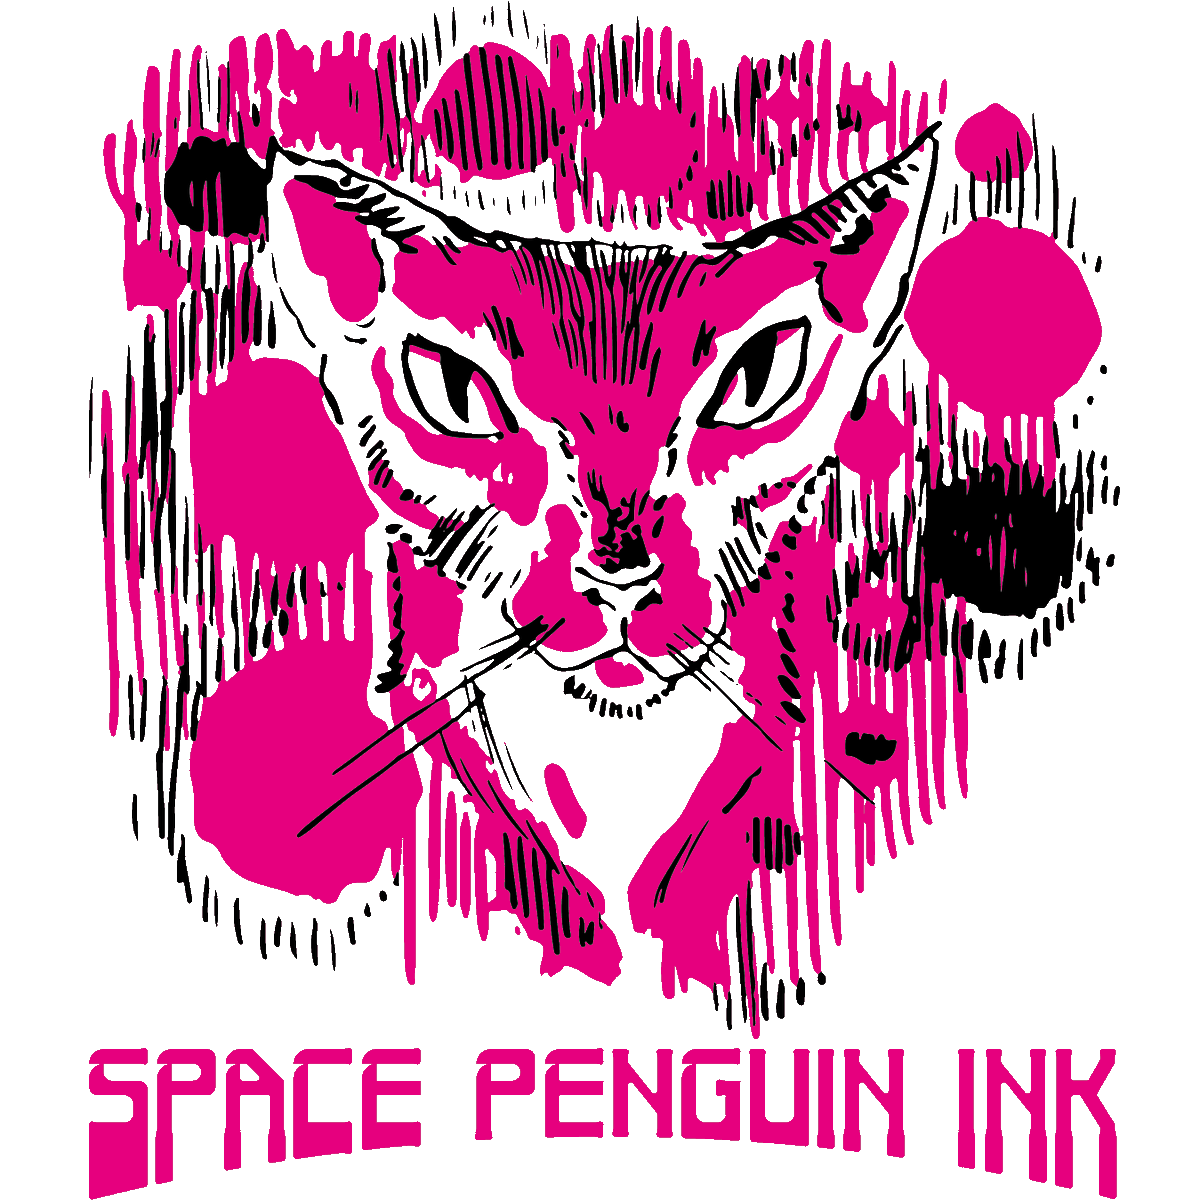 Space Penguin Ink is live! We're an independent tabletop game publisher with a unique vision for the future of our hobby. We've been hard at work since November 2022 and are proud to announce the release of our first five titles!